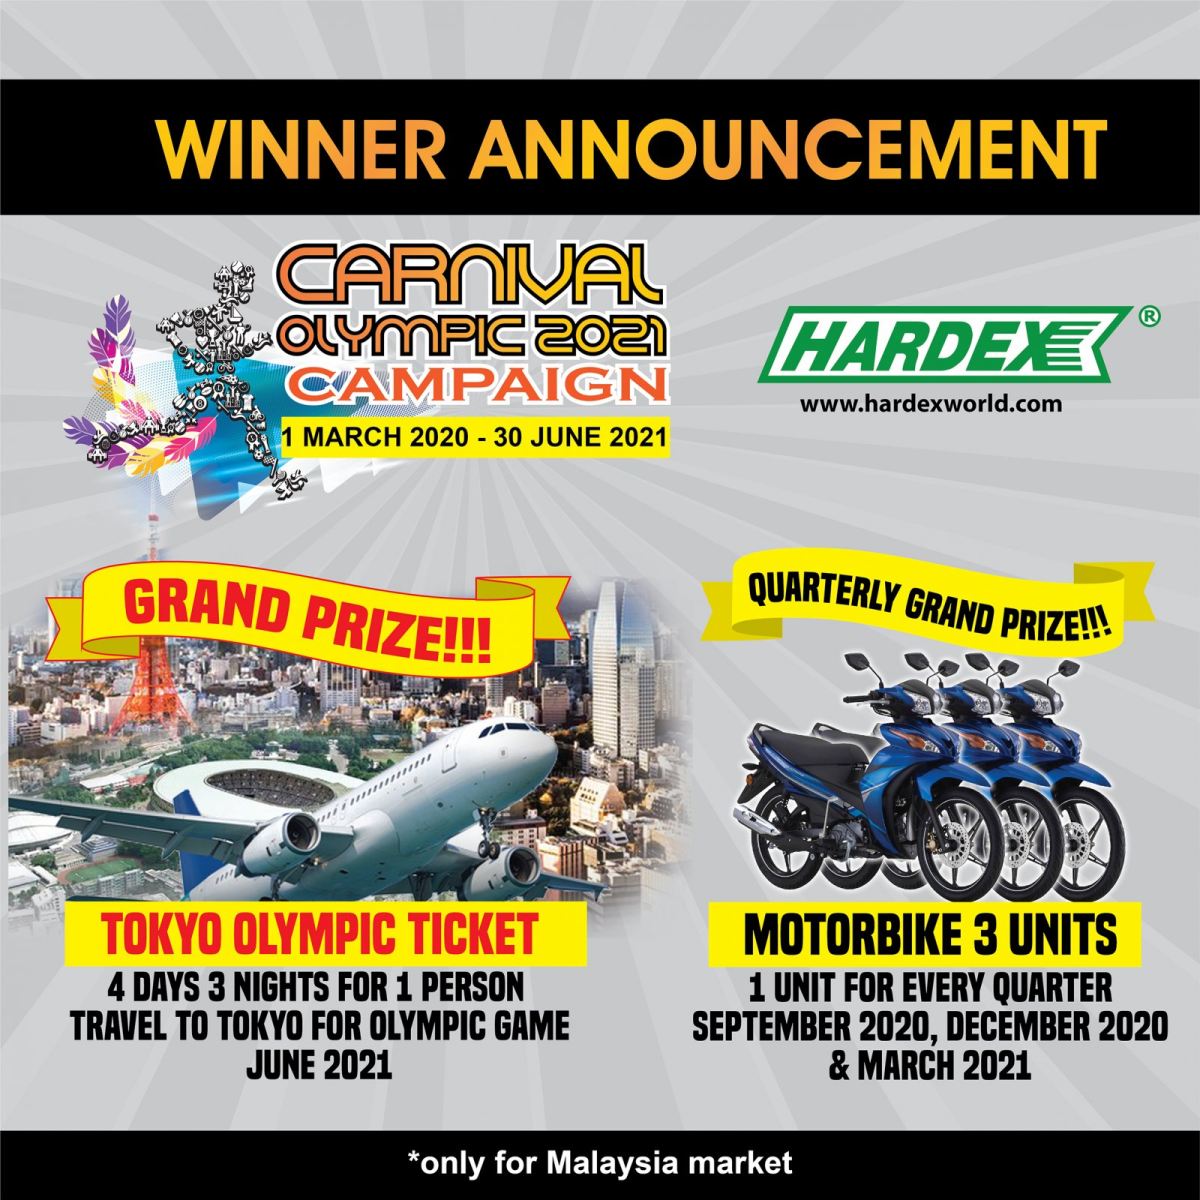 HARDEX CARNIVAL OLYMPIC 2021 CAMPAIGN - WINNER ANNOUNCEMENT